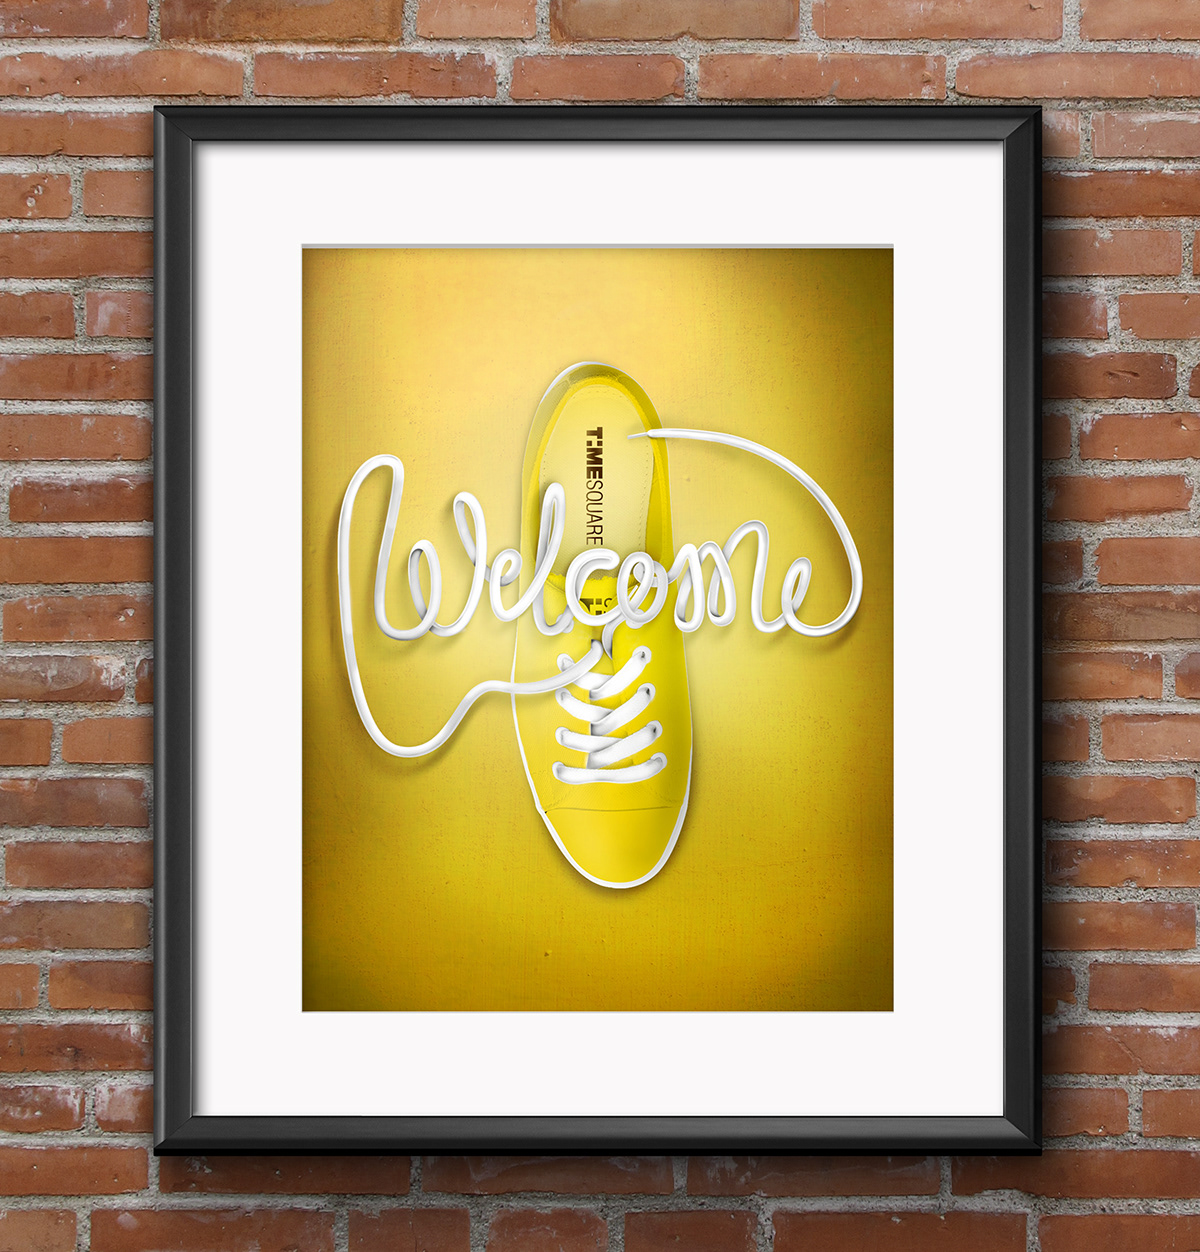 Timesqure welcome Shoelace yellow type